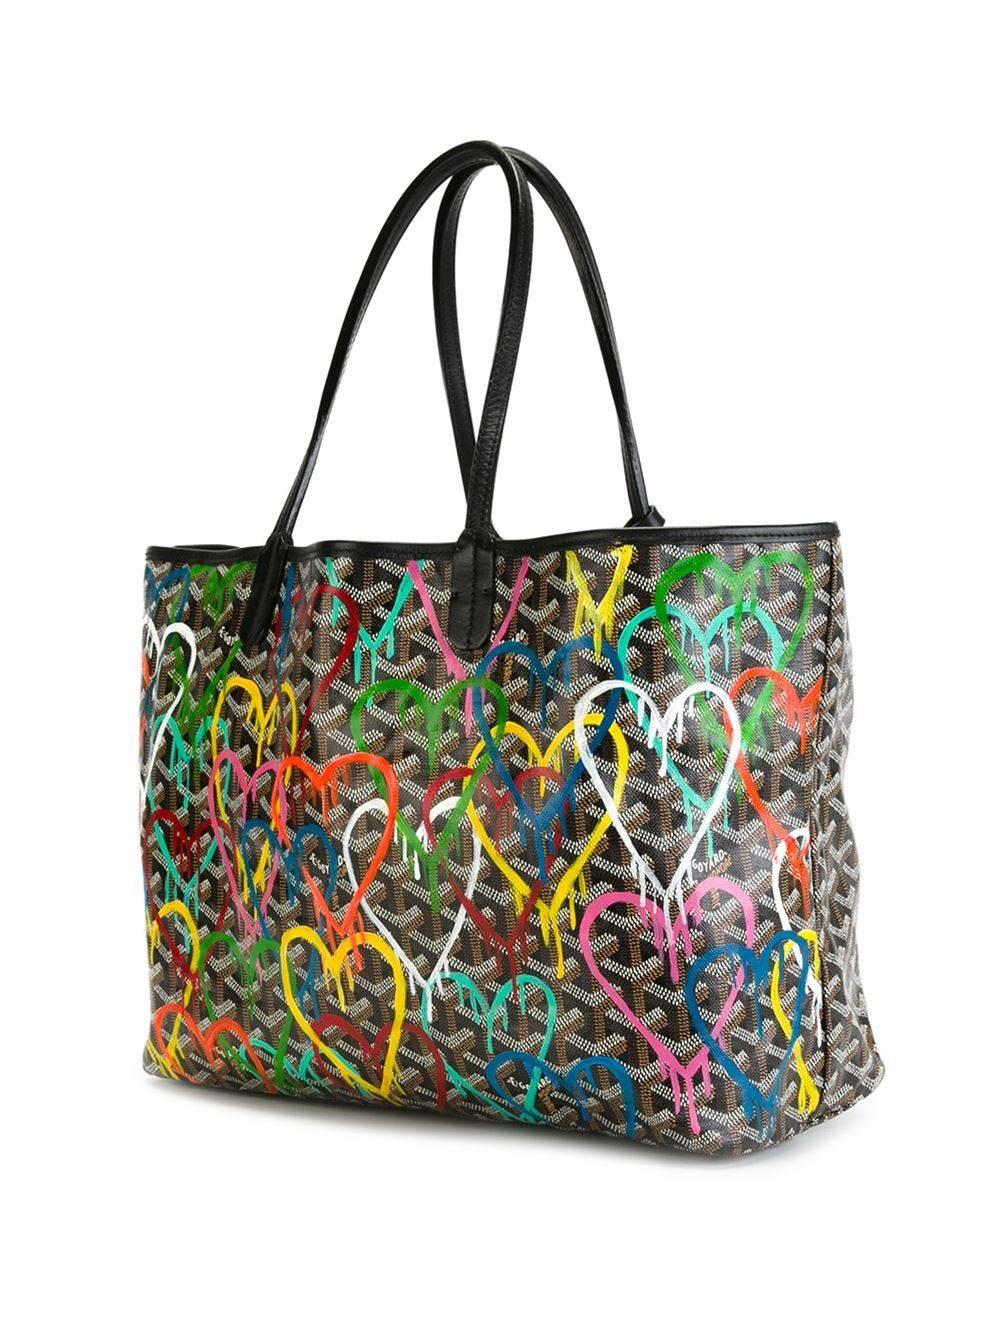 Multicoloured leather monogram shopper tote featuring top handles, a monogram print, a main internal compartment, a graffiti heart print to the front and a matching pouch.

Colour: Black/ Multi

Composition: Goyardine Canvas

Measurements: W: 47cm,